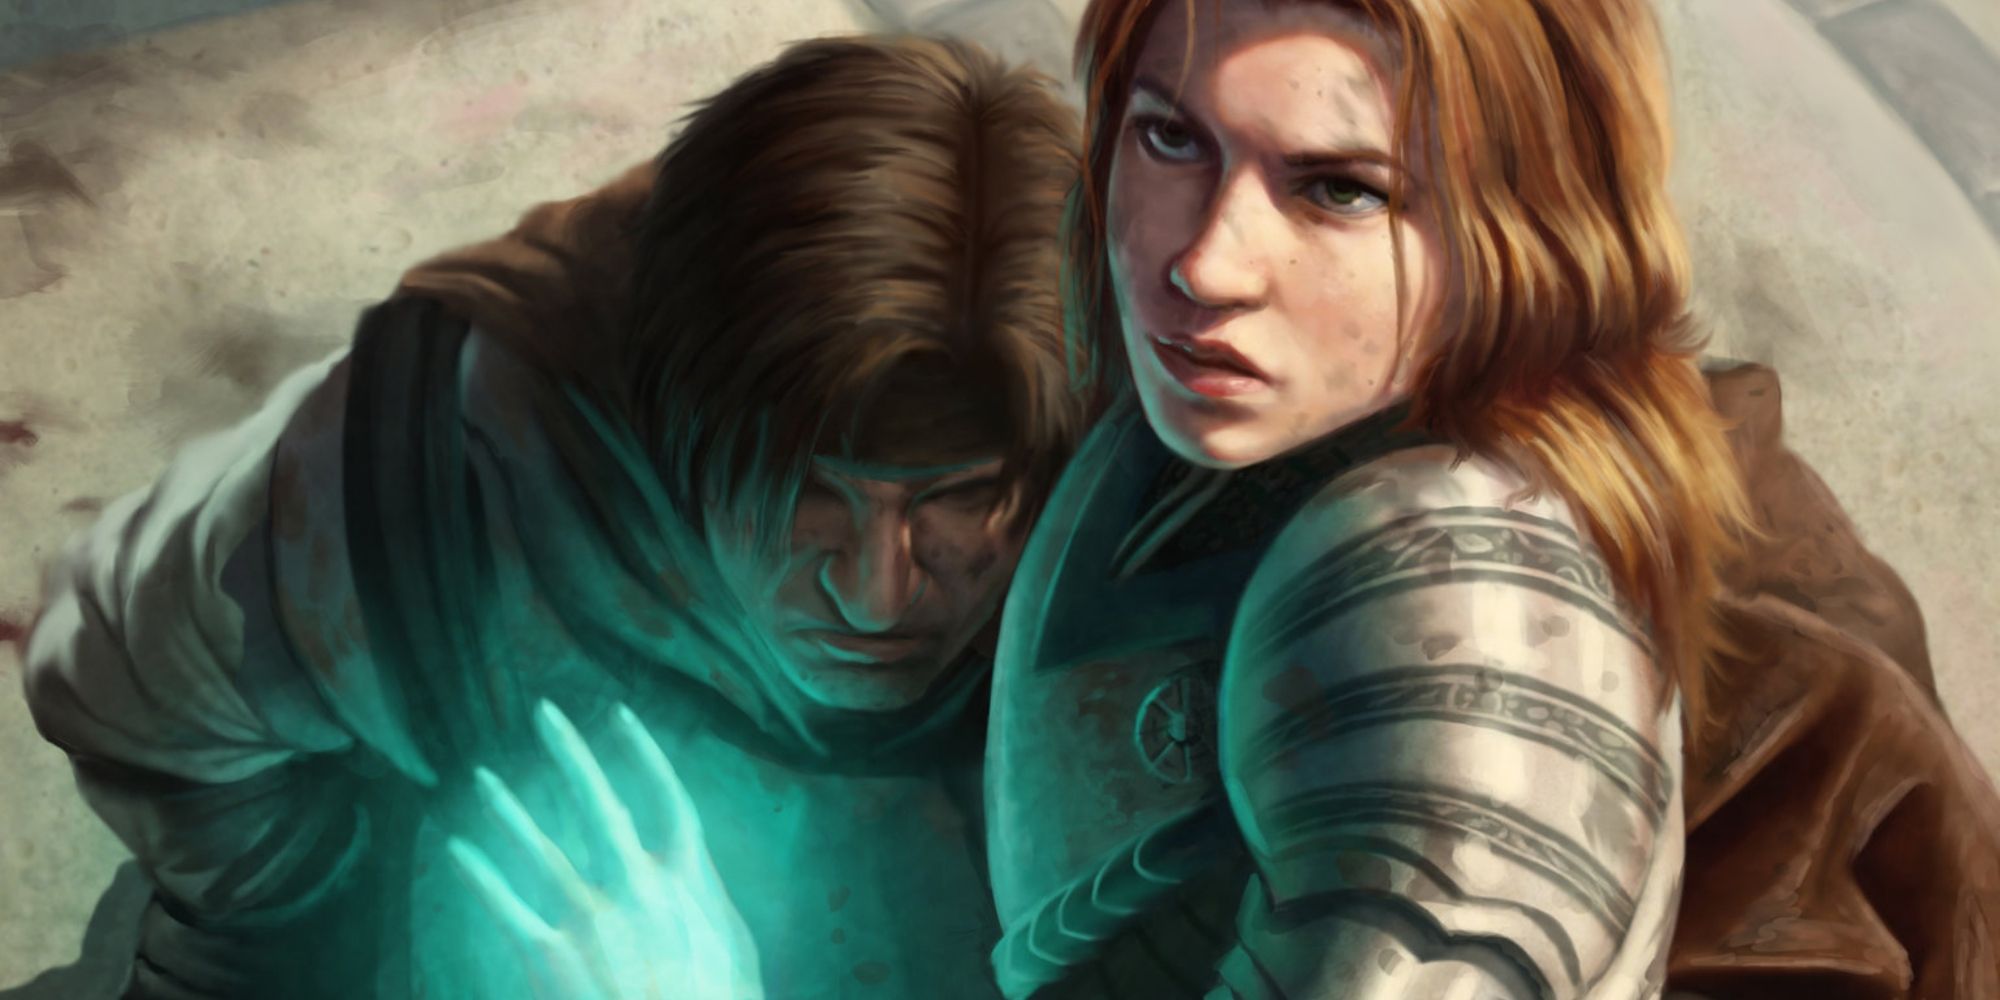 A cleric with a glowing hand placed on her companion as she helps him up